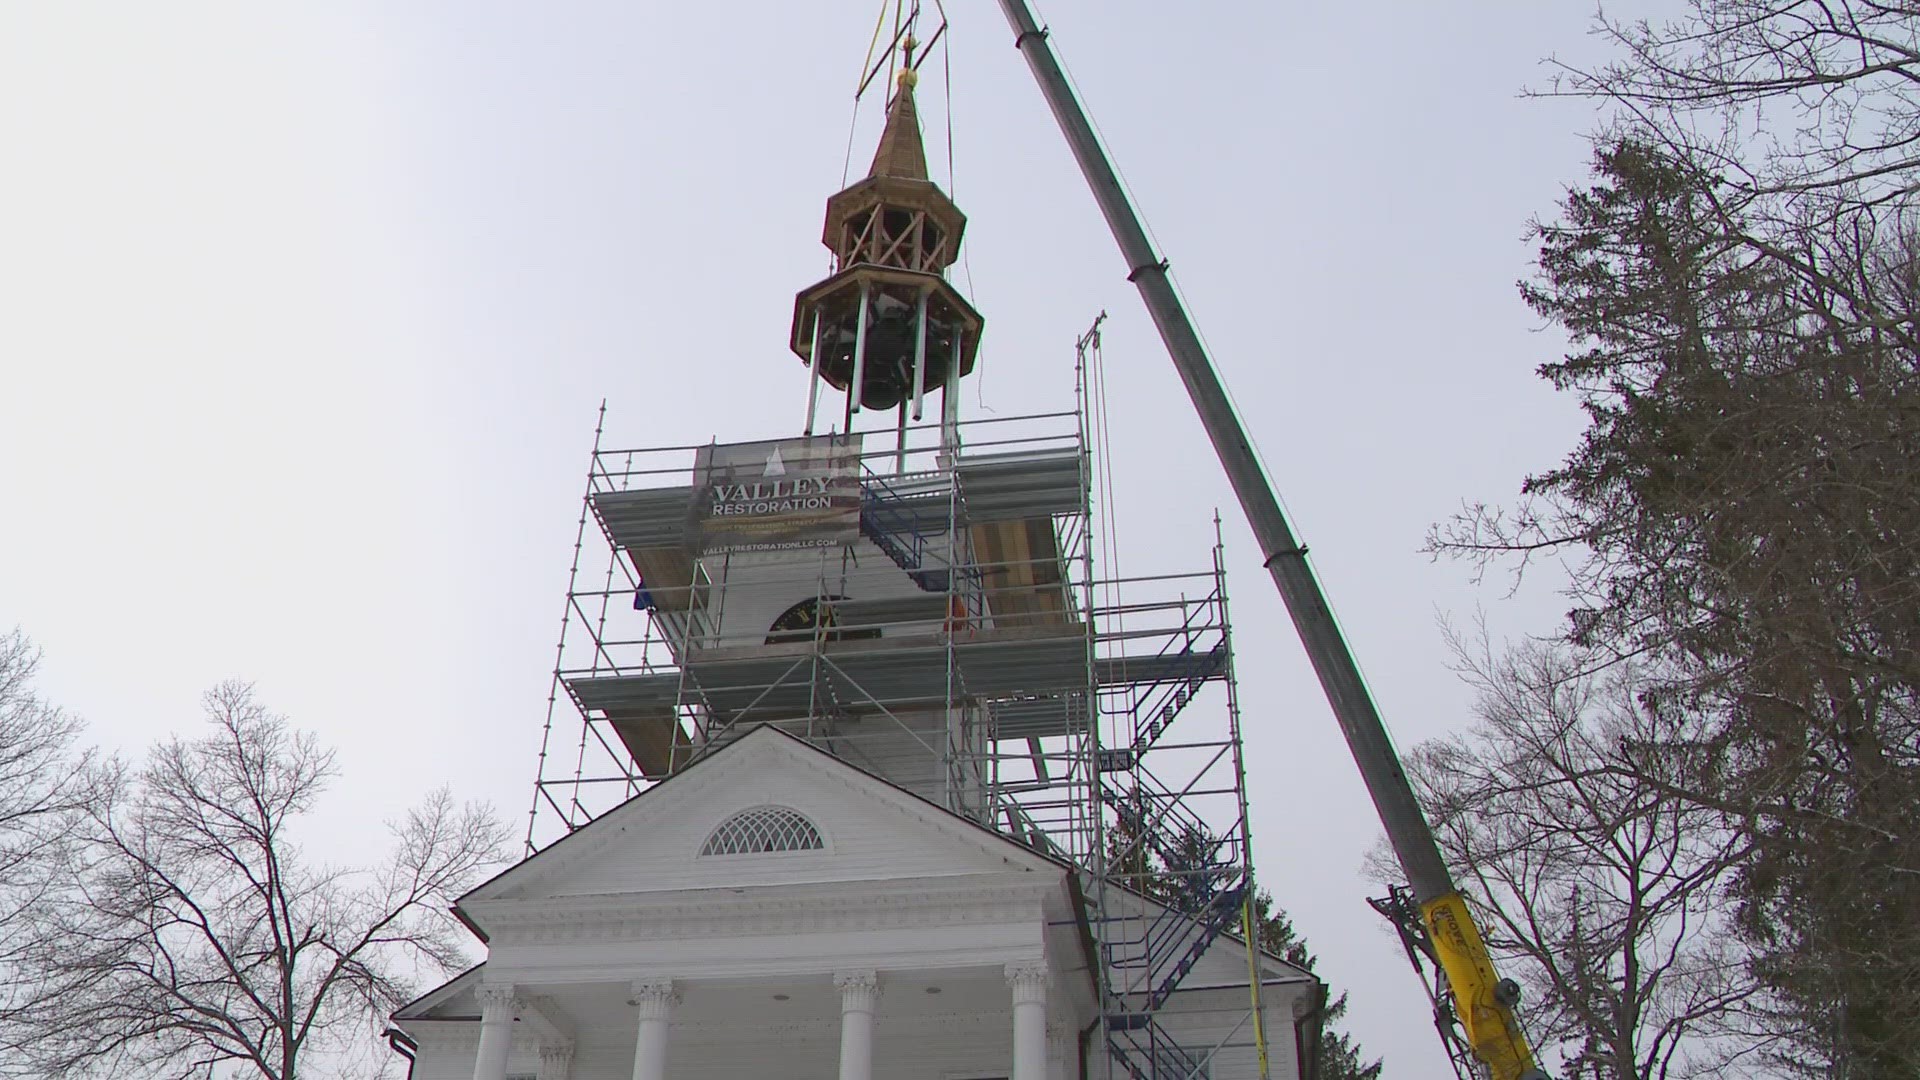 The three-year restoration project takes a team to reach the top.